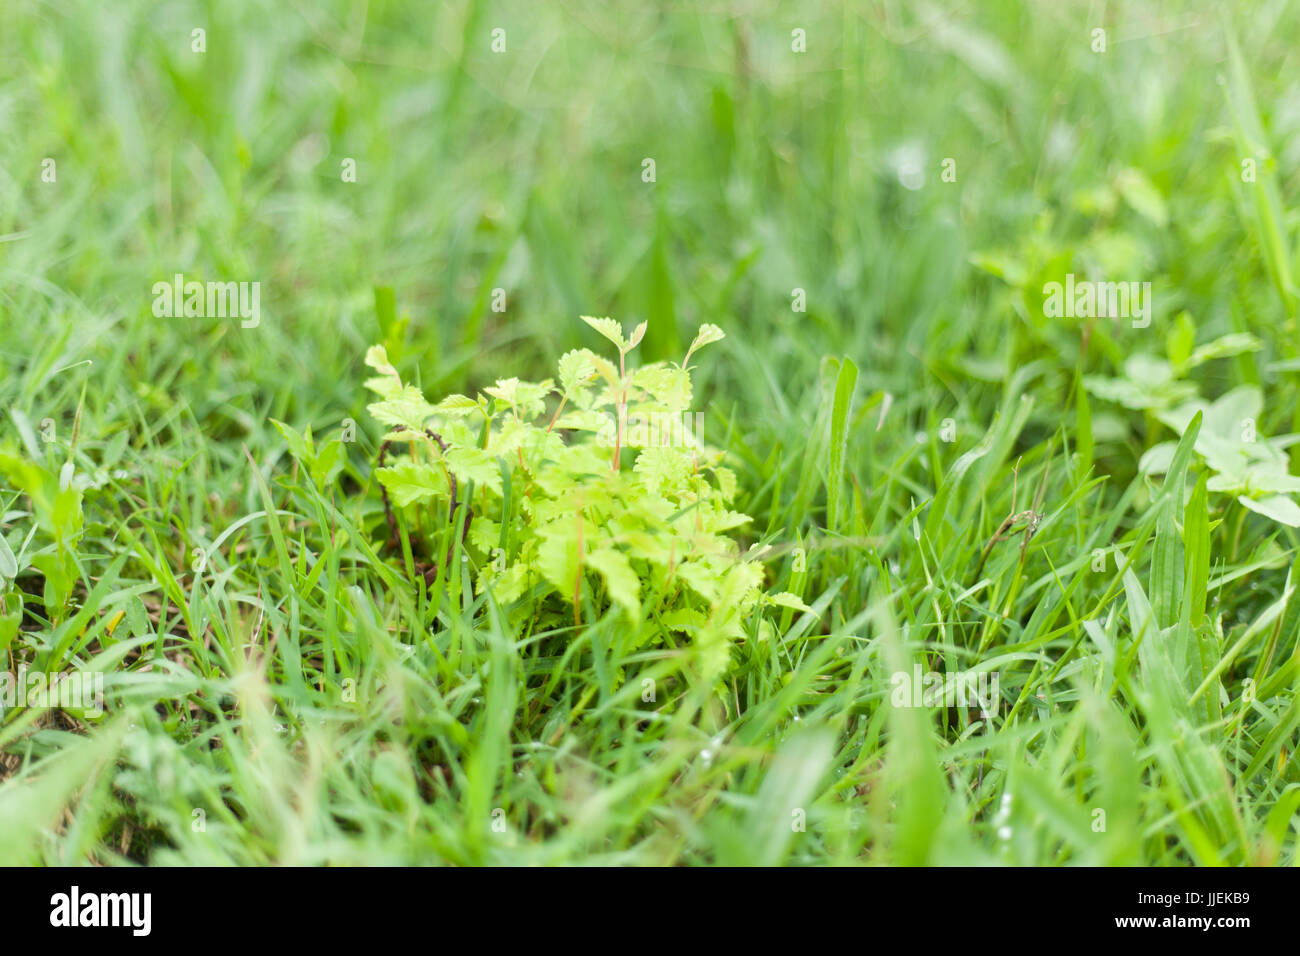 Mint plant with green and scented leaves on a spring day Stock Photo